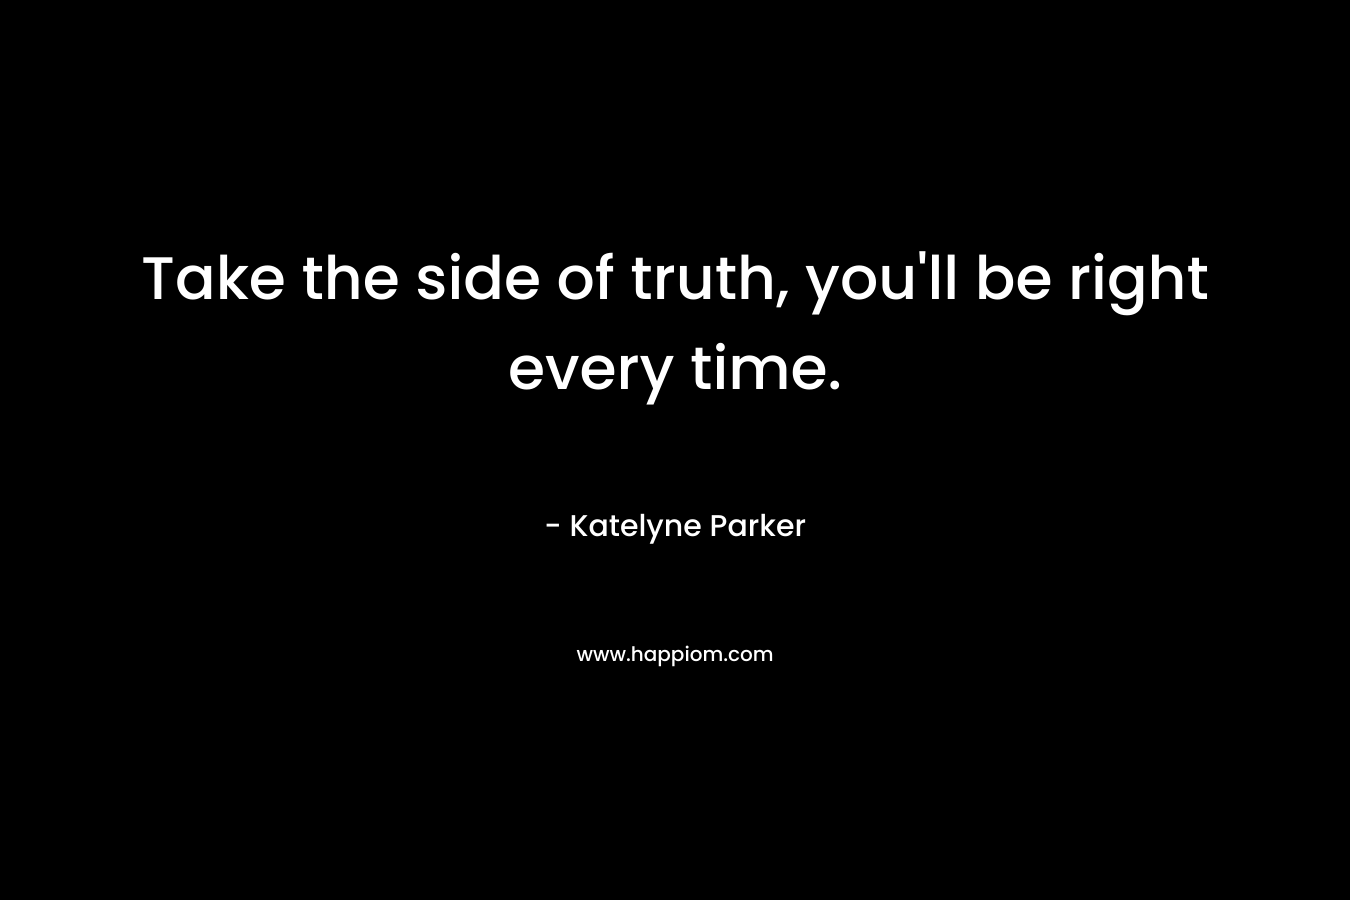 Take the side of truth, you’ll be right every time. – Katelyne Parker